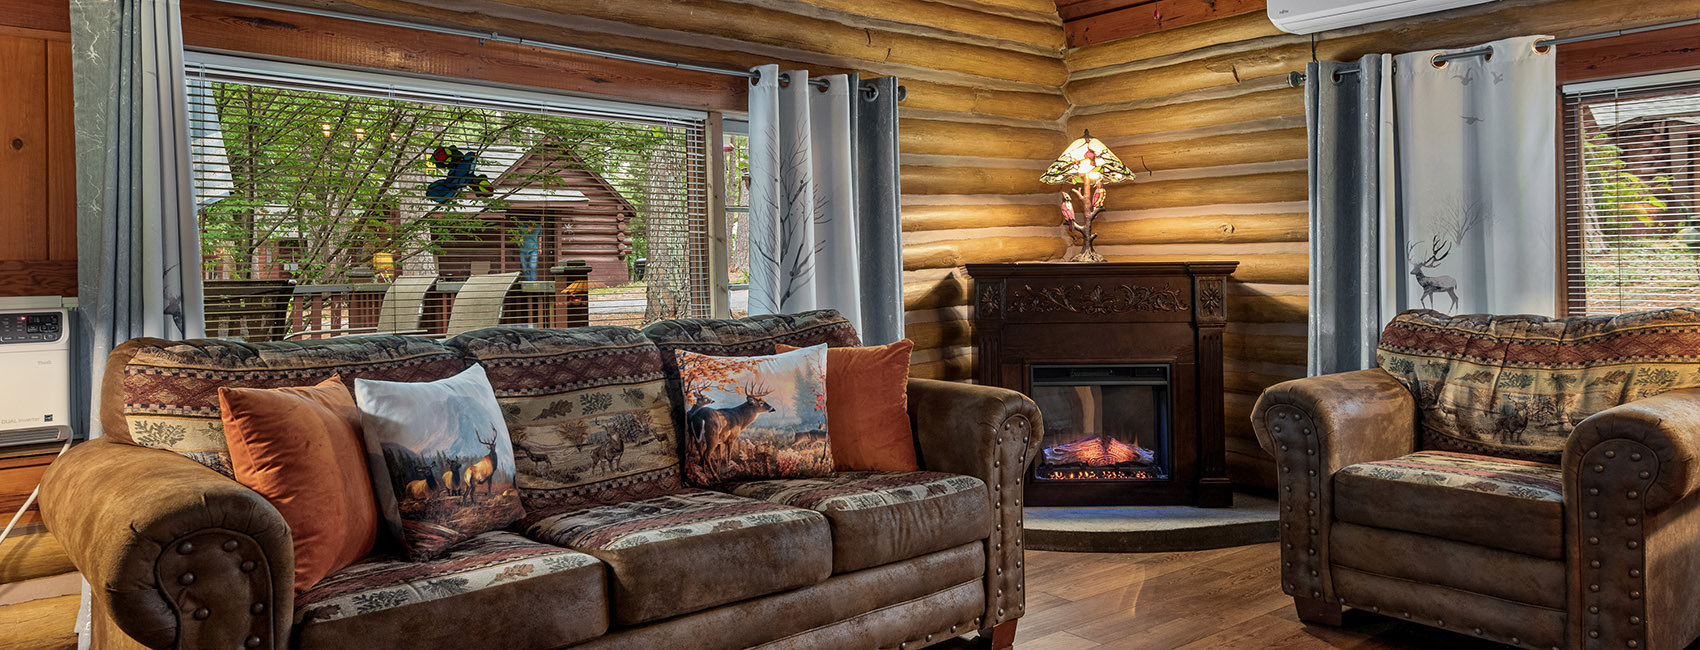 Log Suite sitting area and fireplace